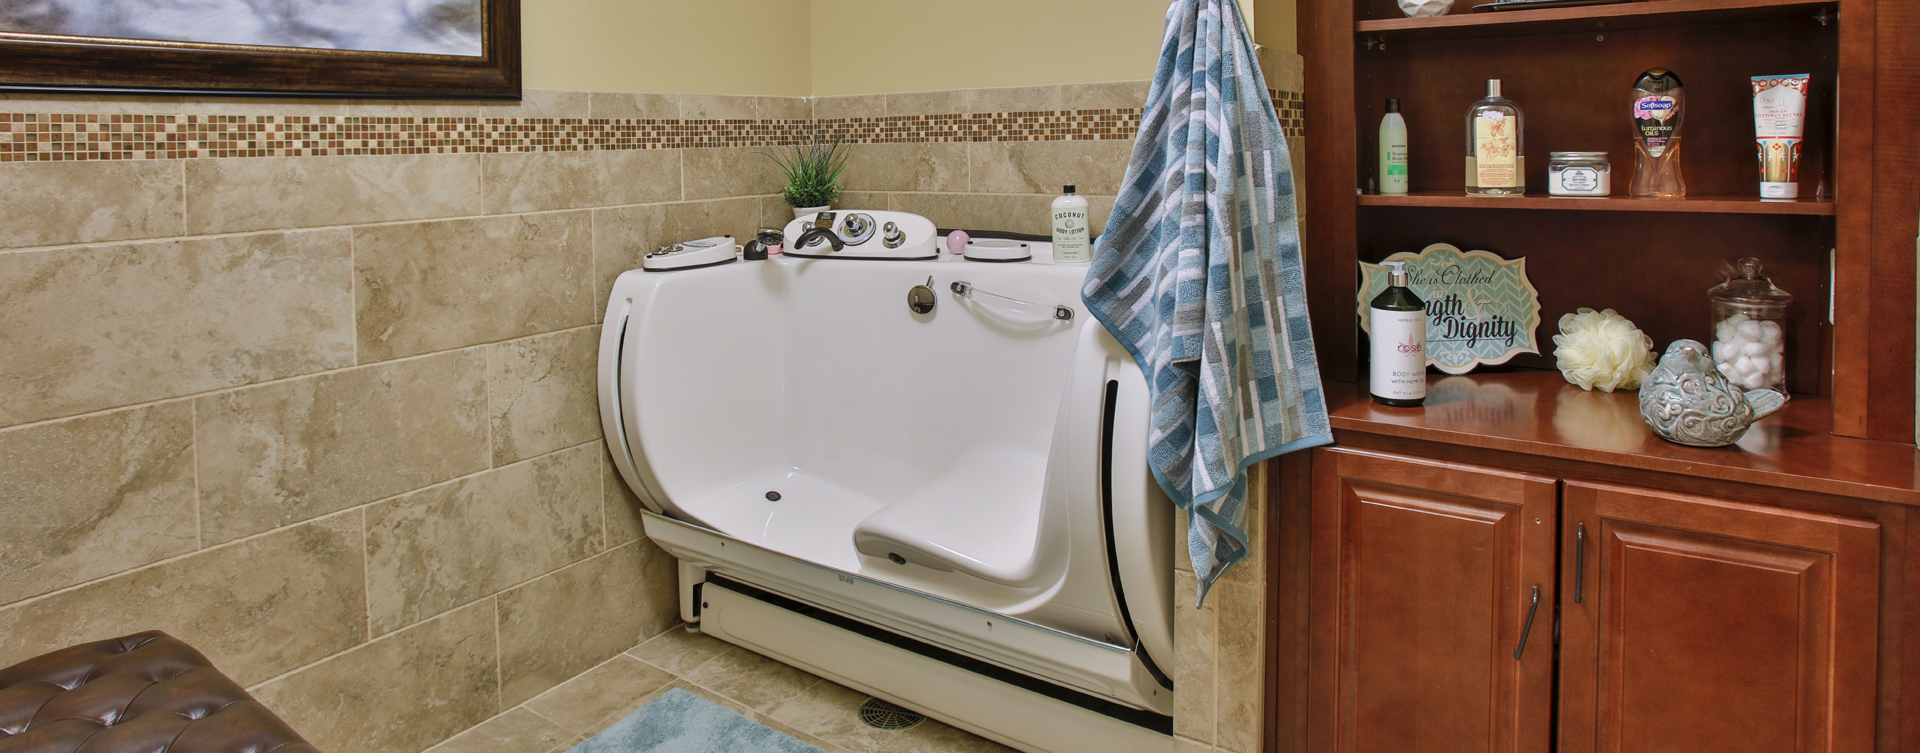 With an easy access design, our whirlpool allows you to enjoy a warm bath safely and comfortably at Bickford of Bloomington